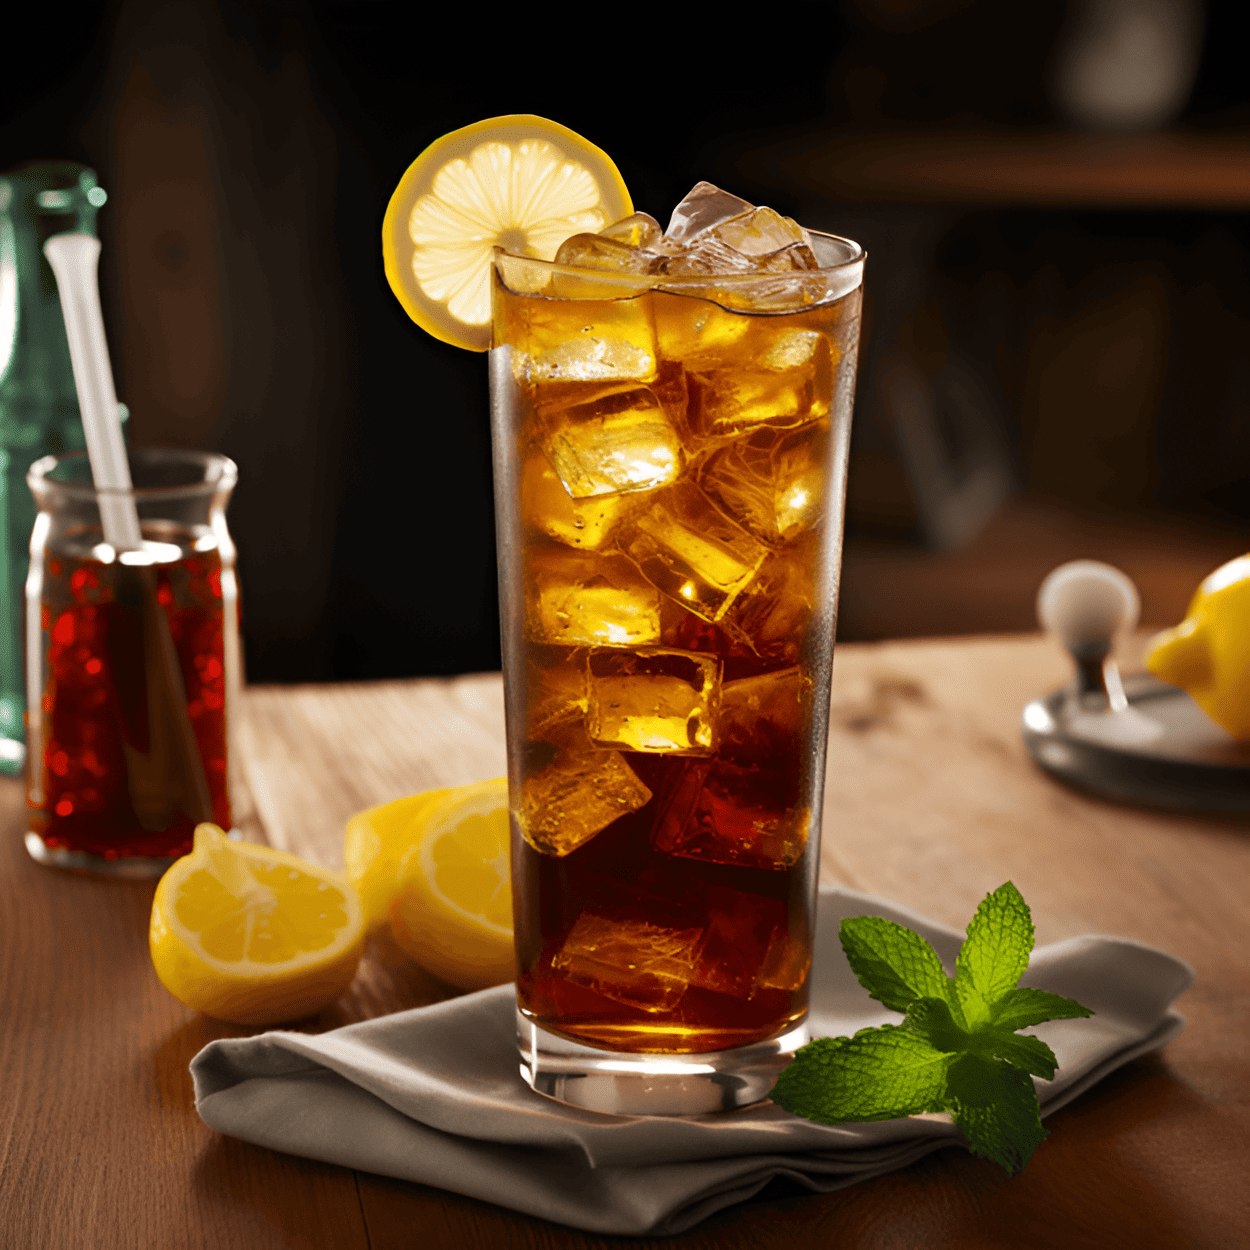 Jack Hammer Recipe - The Jack Hammer is a strong, full-bodied cocktail with a rich, smoky flavor. The sweetness of the cola balances the robustness of the whiskey, while the sourness of the lemon juice adds a refreshing twist. It's a well-rounded drink with a smooth, warm finish.